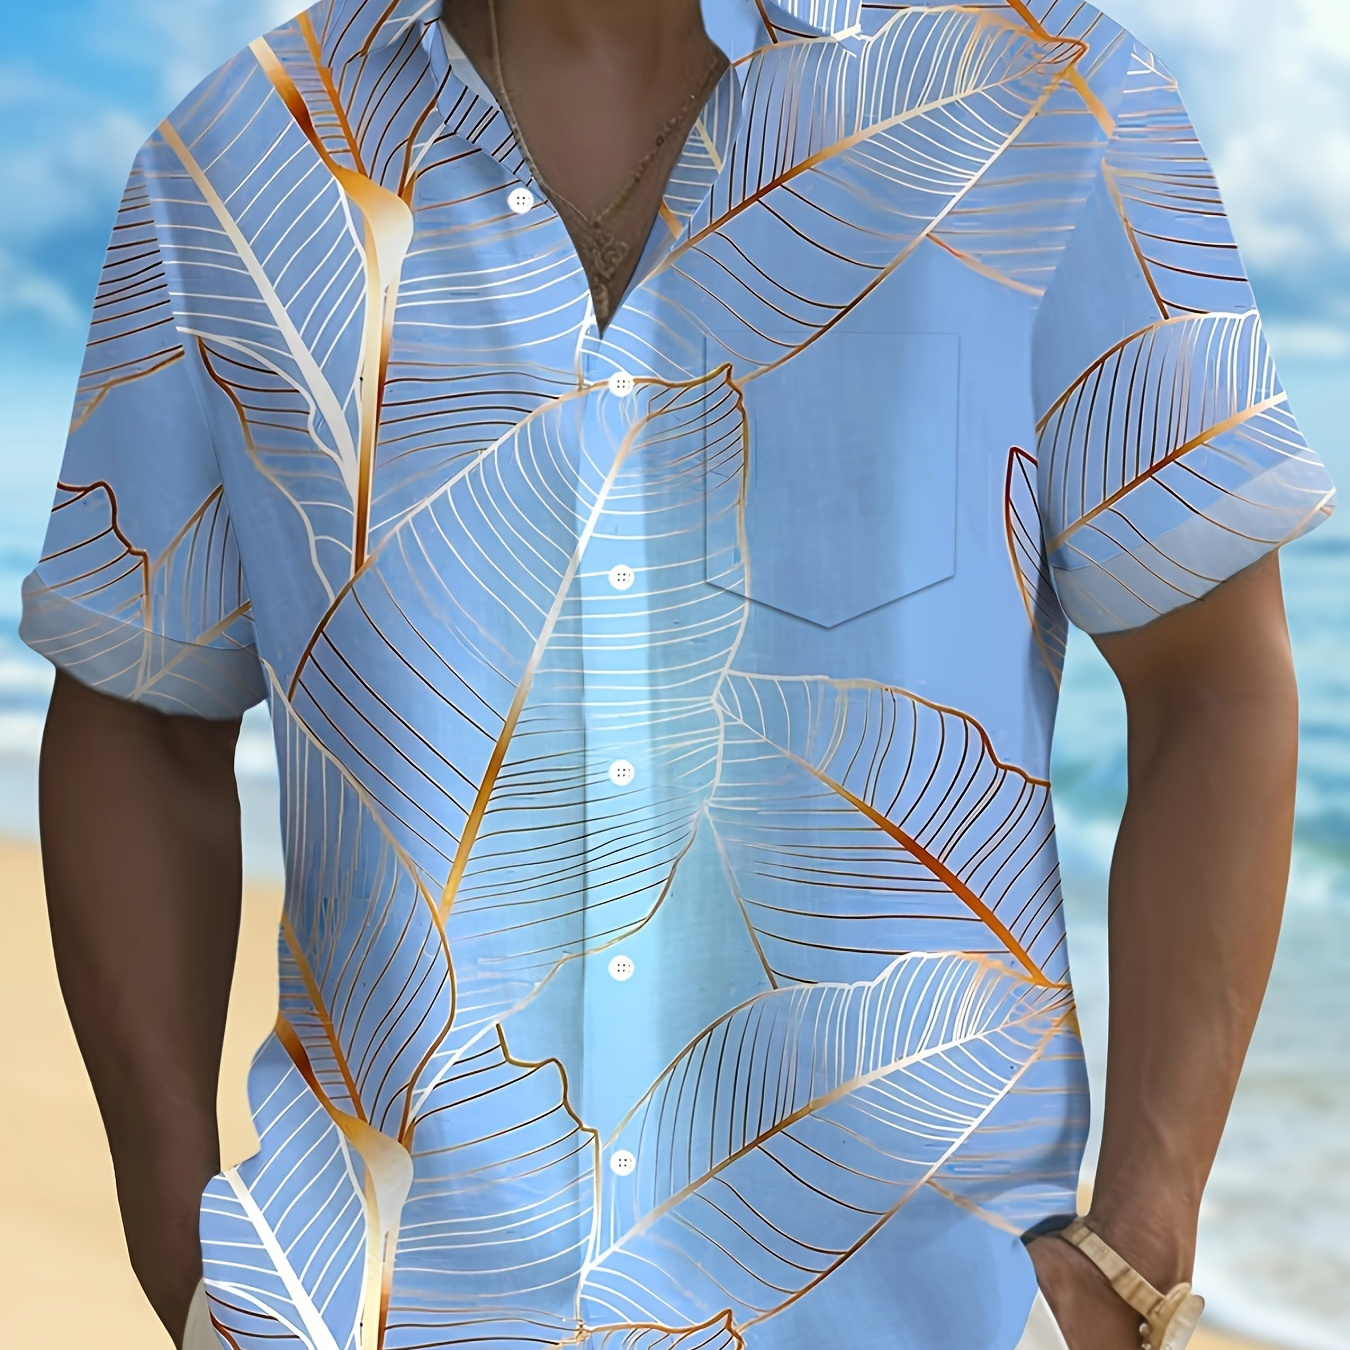 

Plus Size Men's Leaf Graphic Print Shirt For Summer, Stylish Casual Short Sleeve Shirt For Males